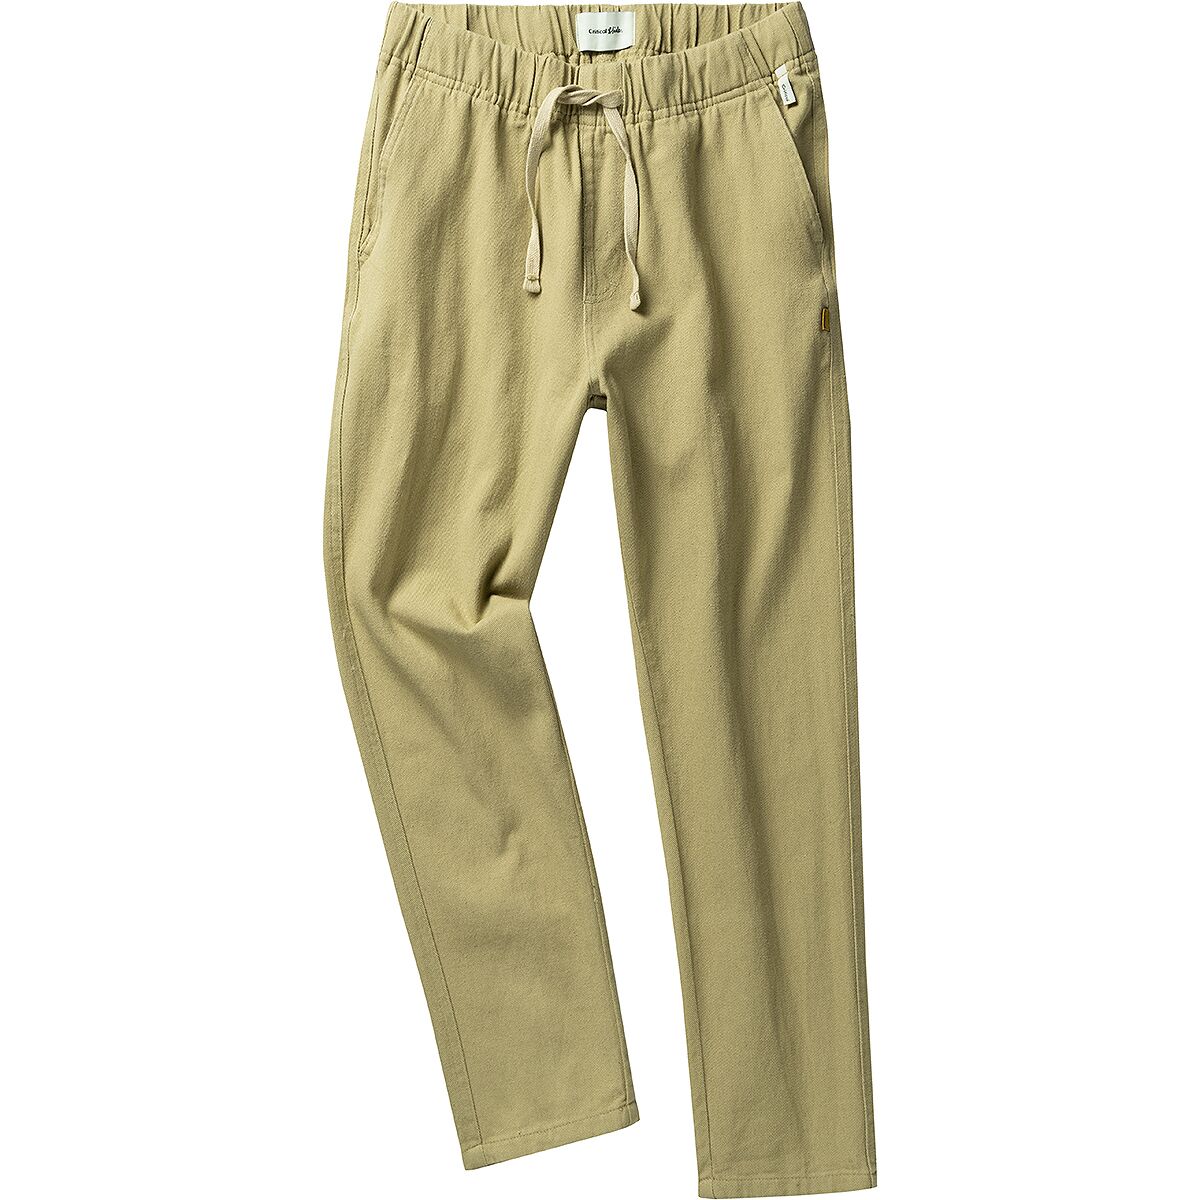 The Critical Slide Society All Day Twill Pant - Men's